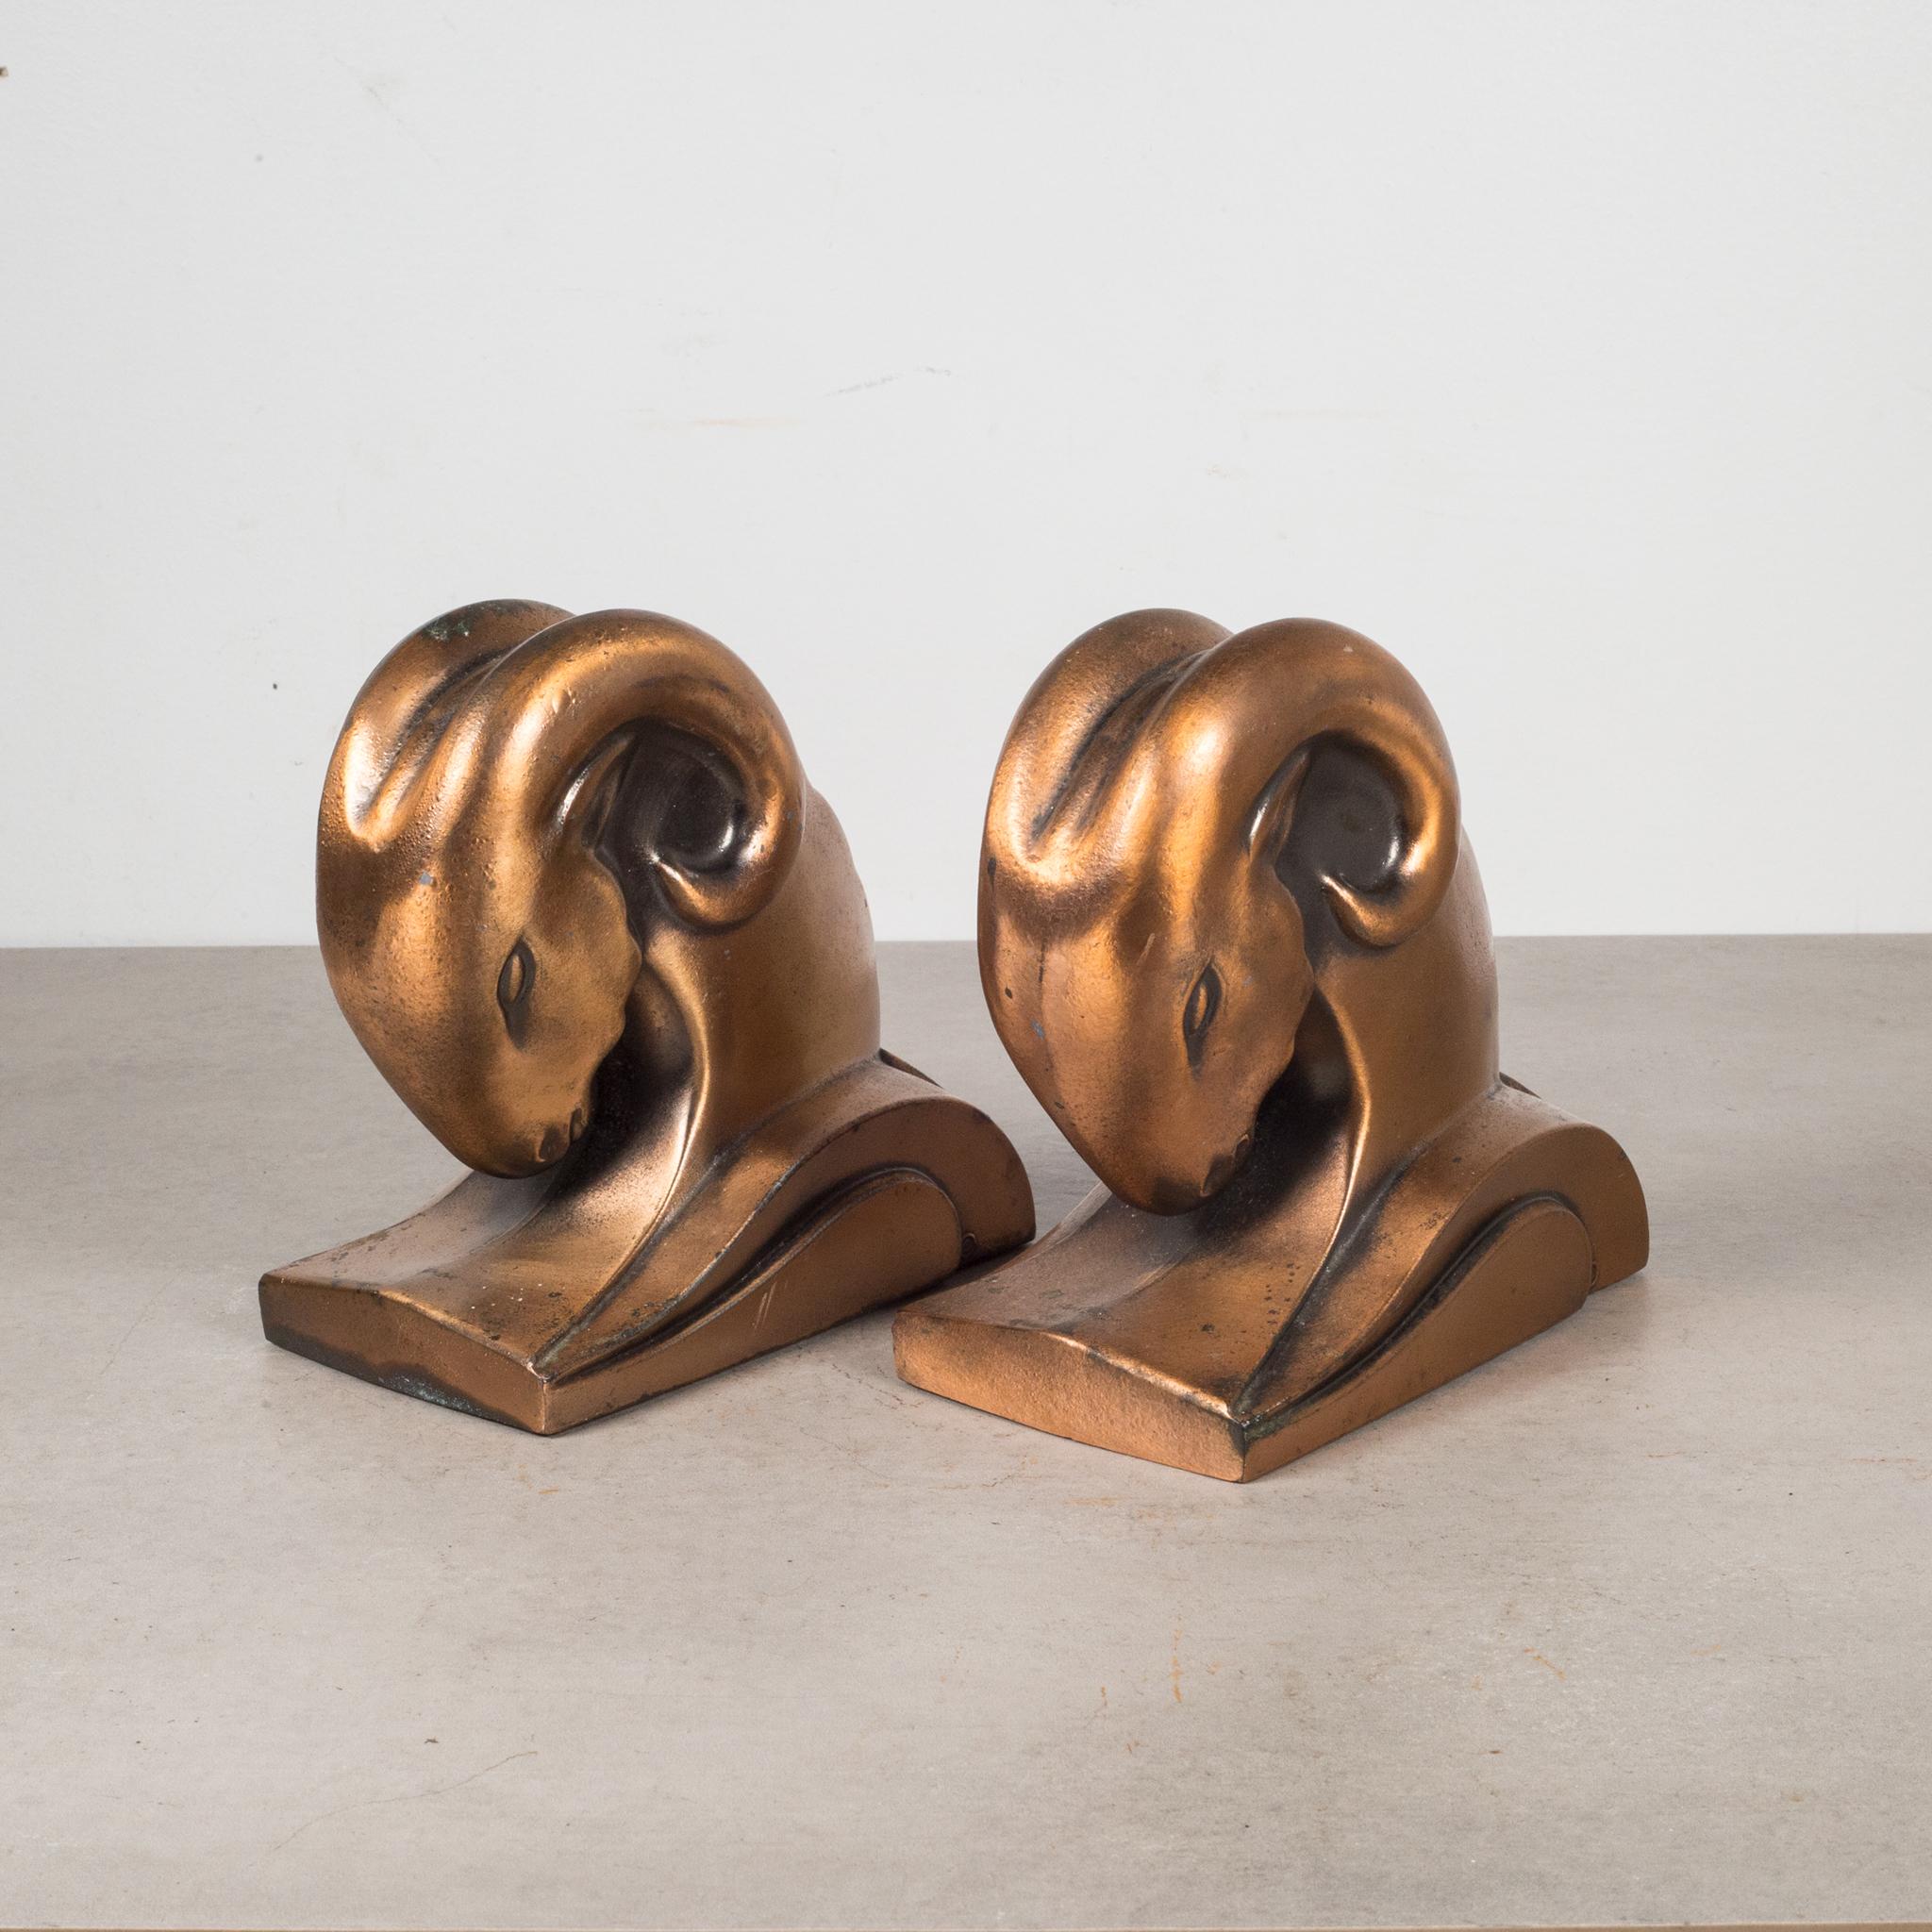 About

These cast Art Deco bookends of stylized ram's heads were manufactured by the Cornell Foundry in New York in the 1930s. They appear to have been made by a lost-wax casting process. Marked with a copyright symbol Cornell.

Creator Cornell